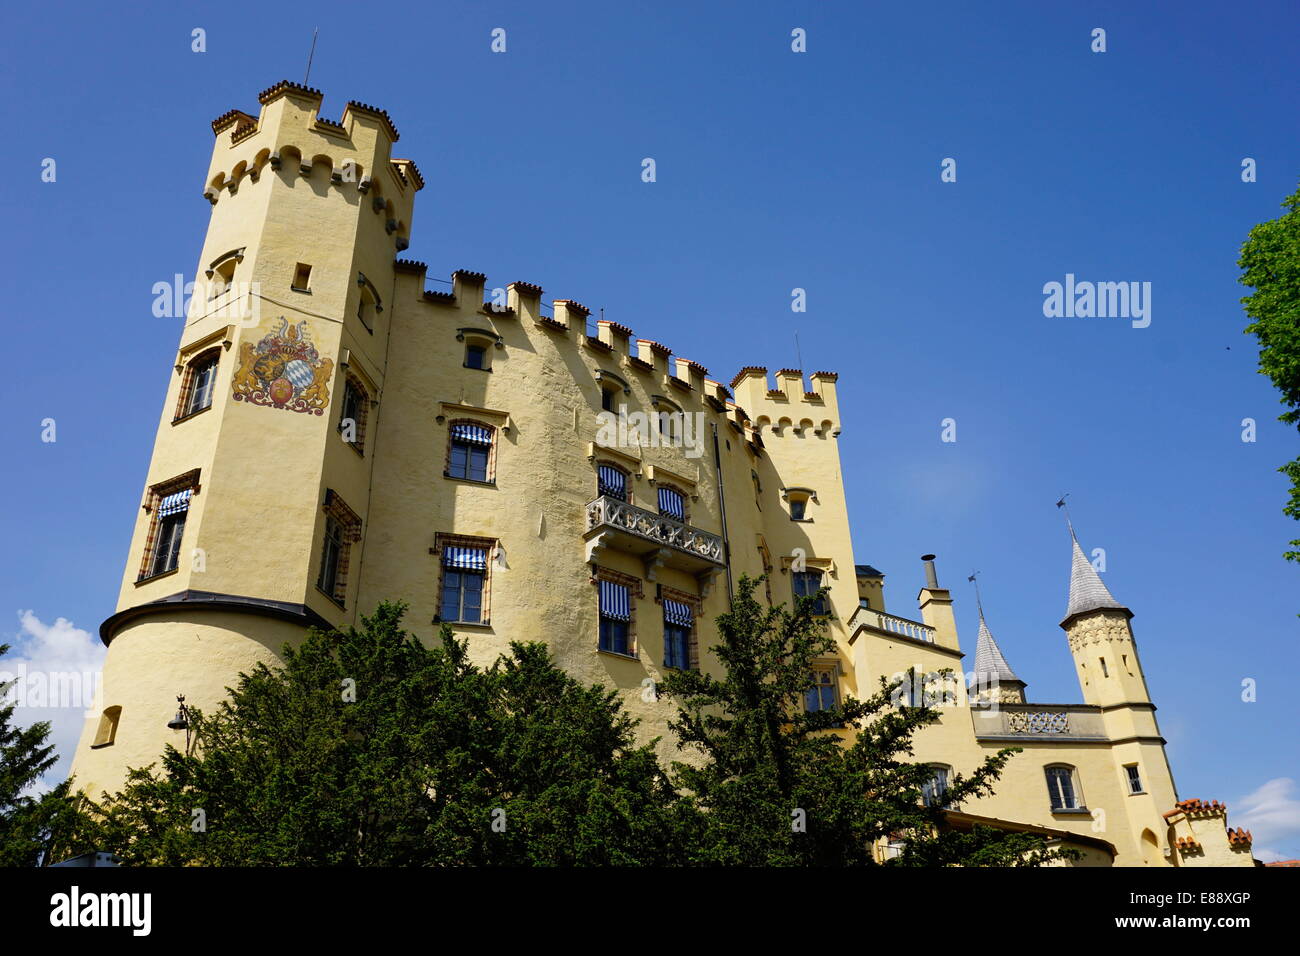 Schloss Hohenschwangau, the former palace of Ludwig the Second, at Hohenschwangau village, near Fussen, Bavaria, Germany, Europe Stock Photo